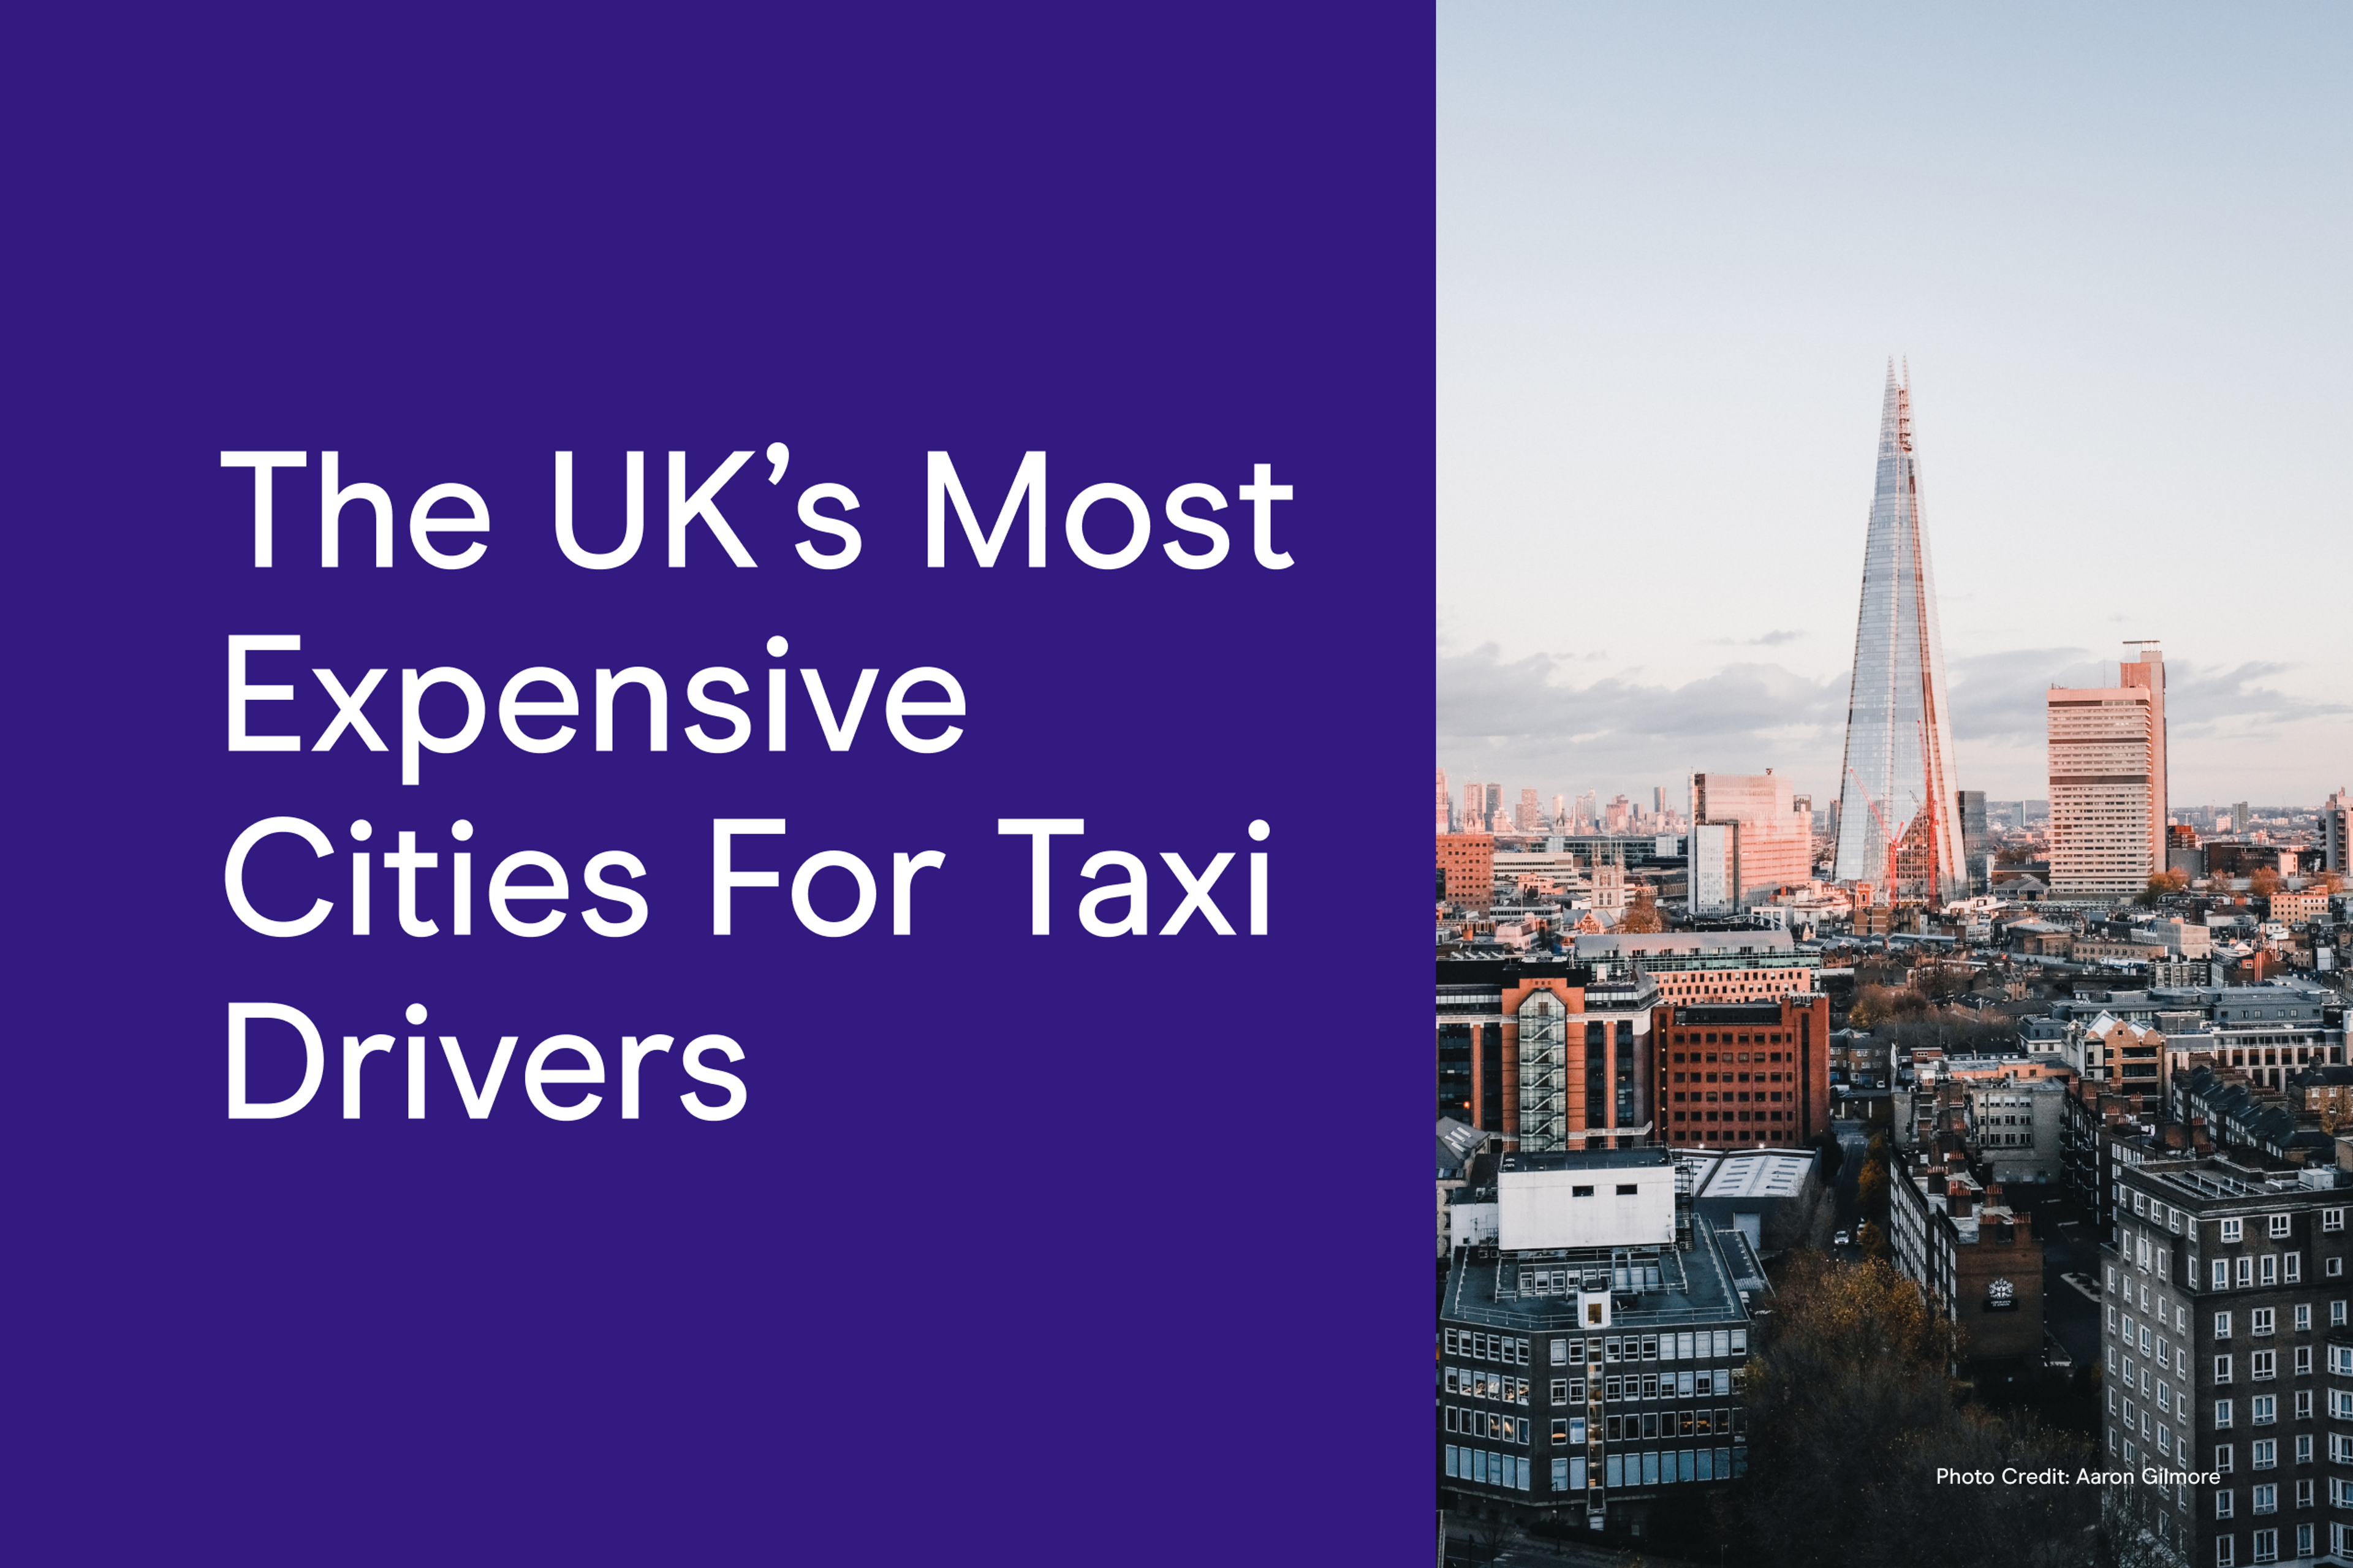 The UK’s most expensive cities for taxi drivers